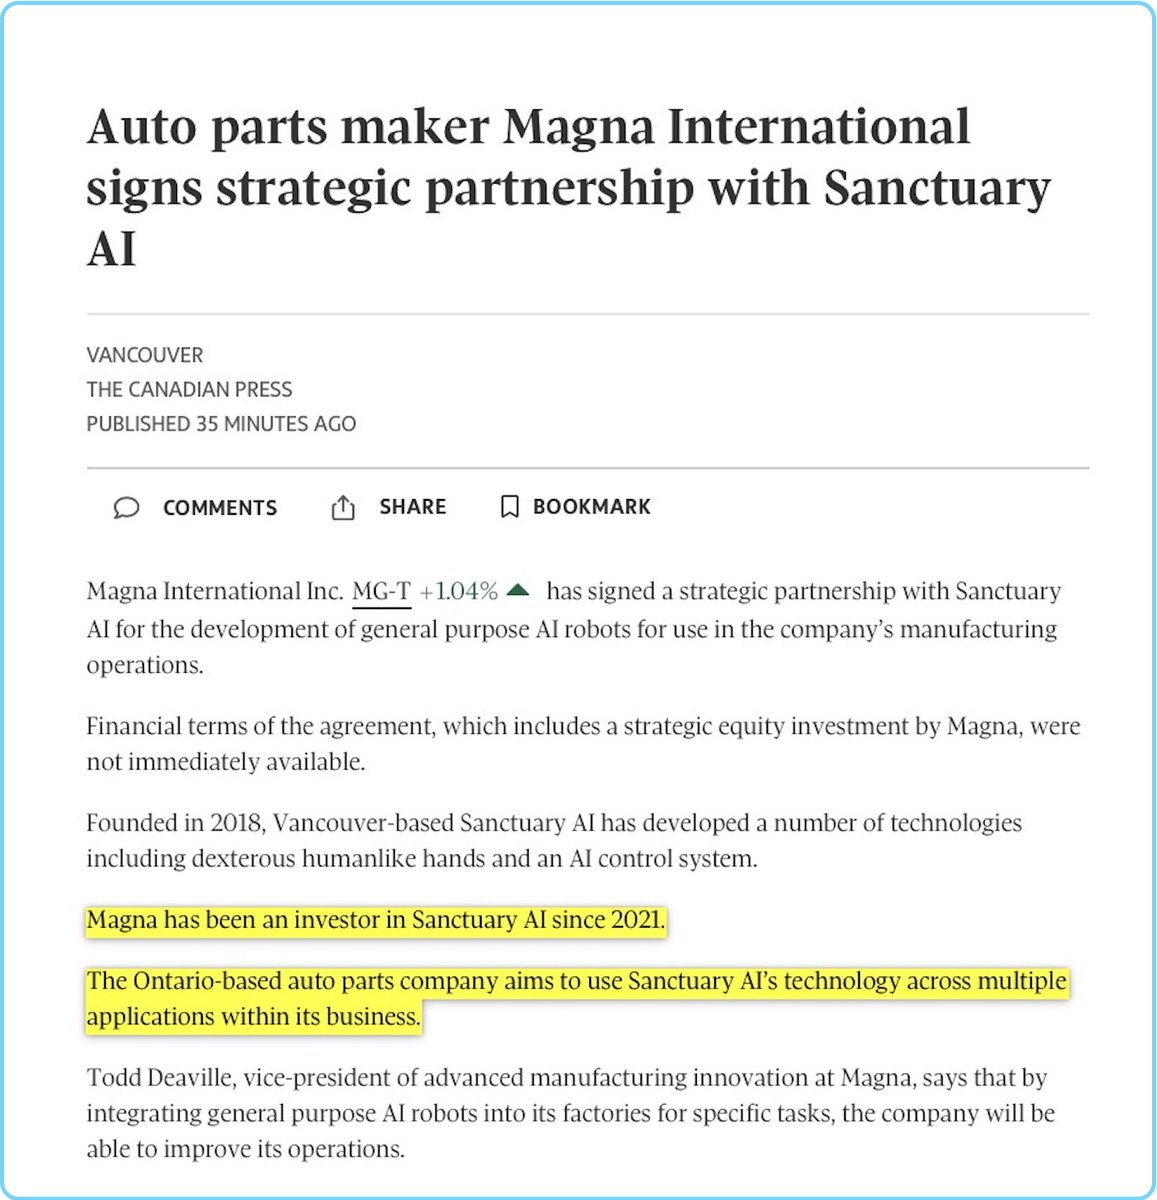 Magna, an investor in Sanctuary AI since 2021, will deploy their robots in factories for a 'multi-disciplinary assessment.'
Sanctuary AI 🤝Magna
AGIBOT 🤝BYD
UBTECH 🤝BYD 
UBTECH 🤝Nio
Figure 🤝BMW
Apptronik 🤝 Mercedes

Optimus team should also... never mind!